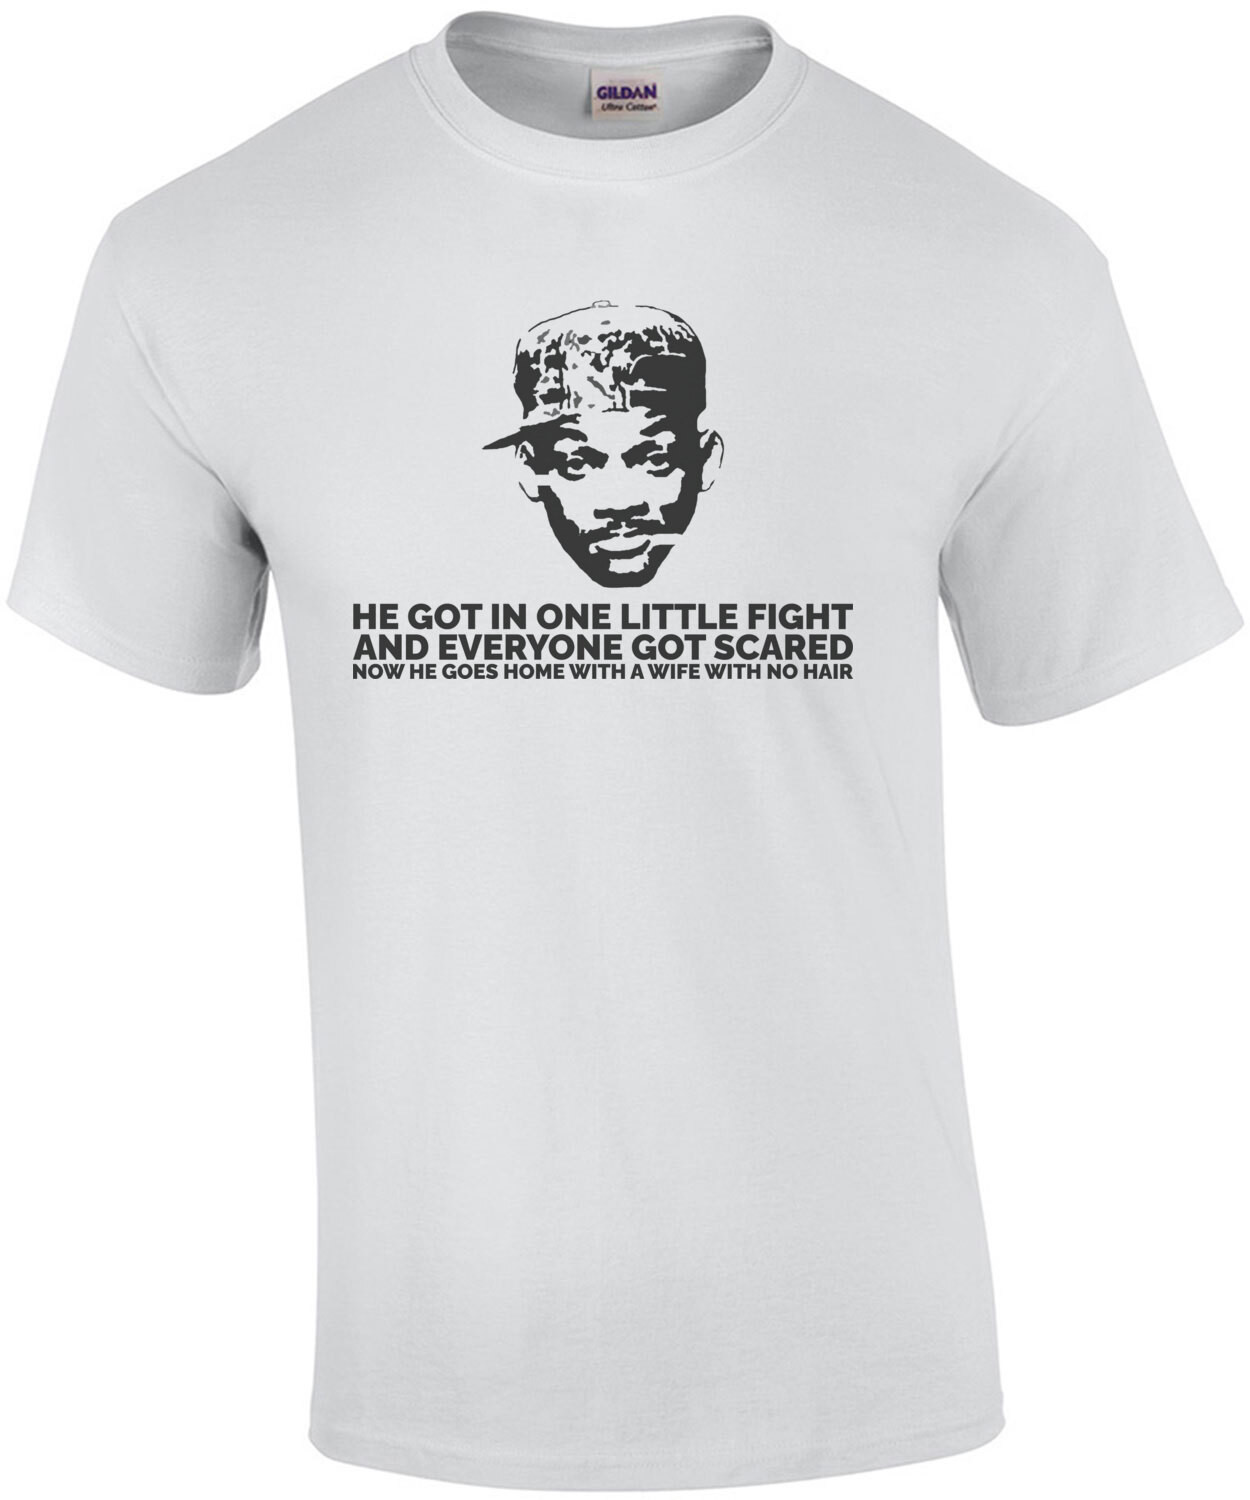 Will Smith Chris Rock One Little Fight and Everyone Got Scared Funny Shirt